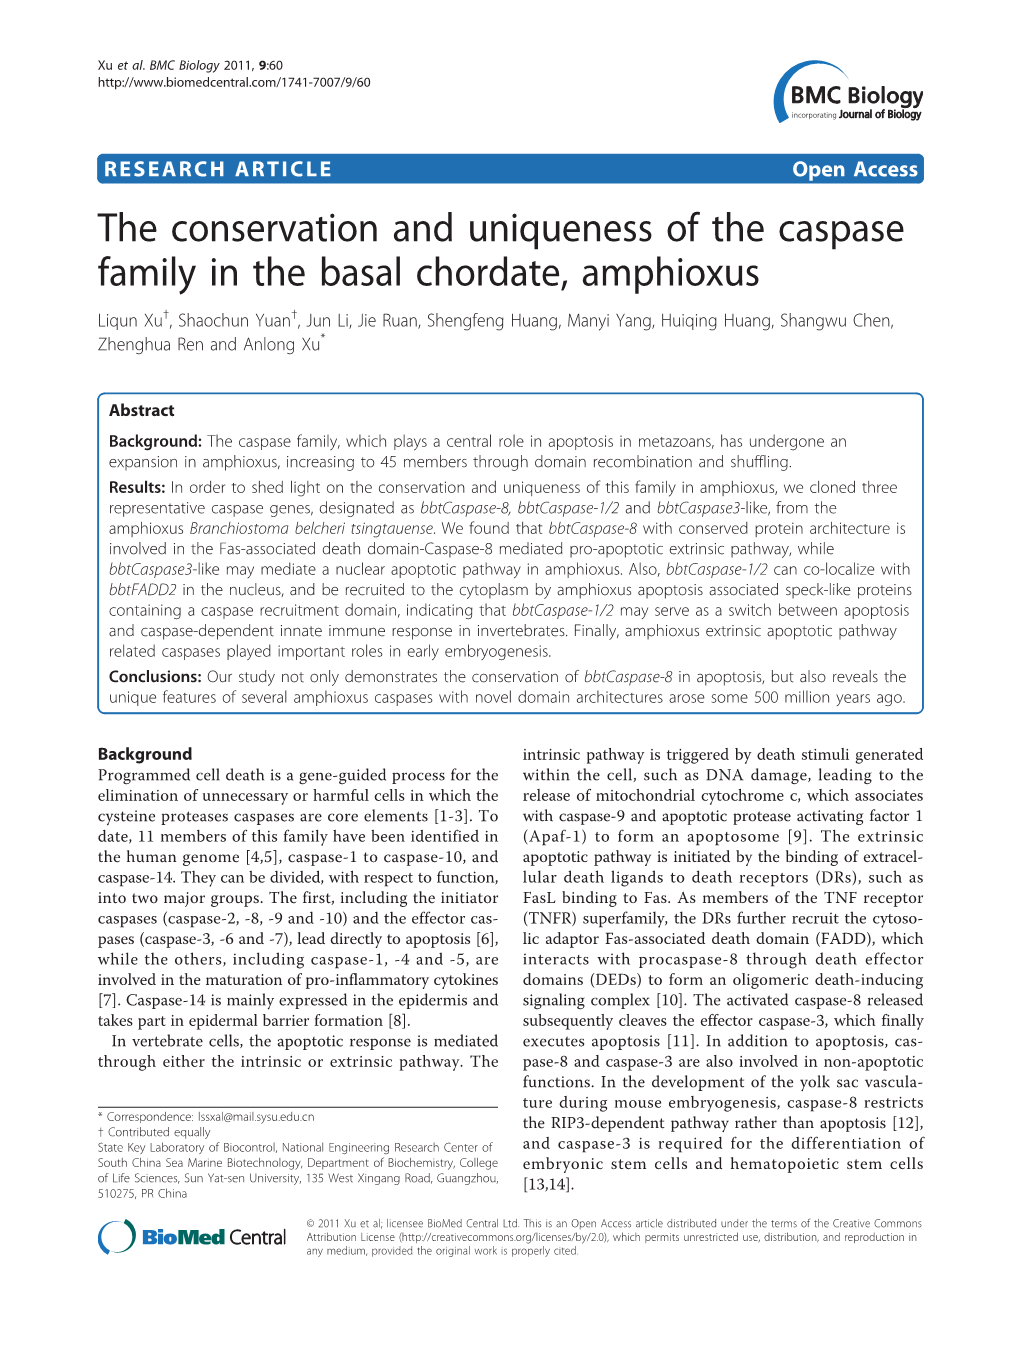 The Conservation and Uniqueness of the Caspase Family in the Basal